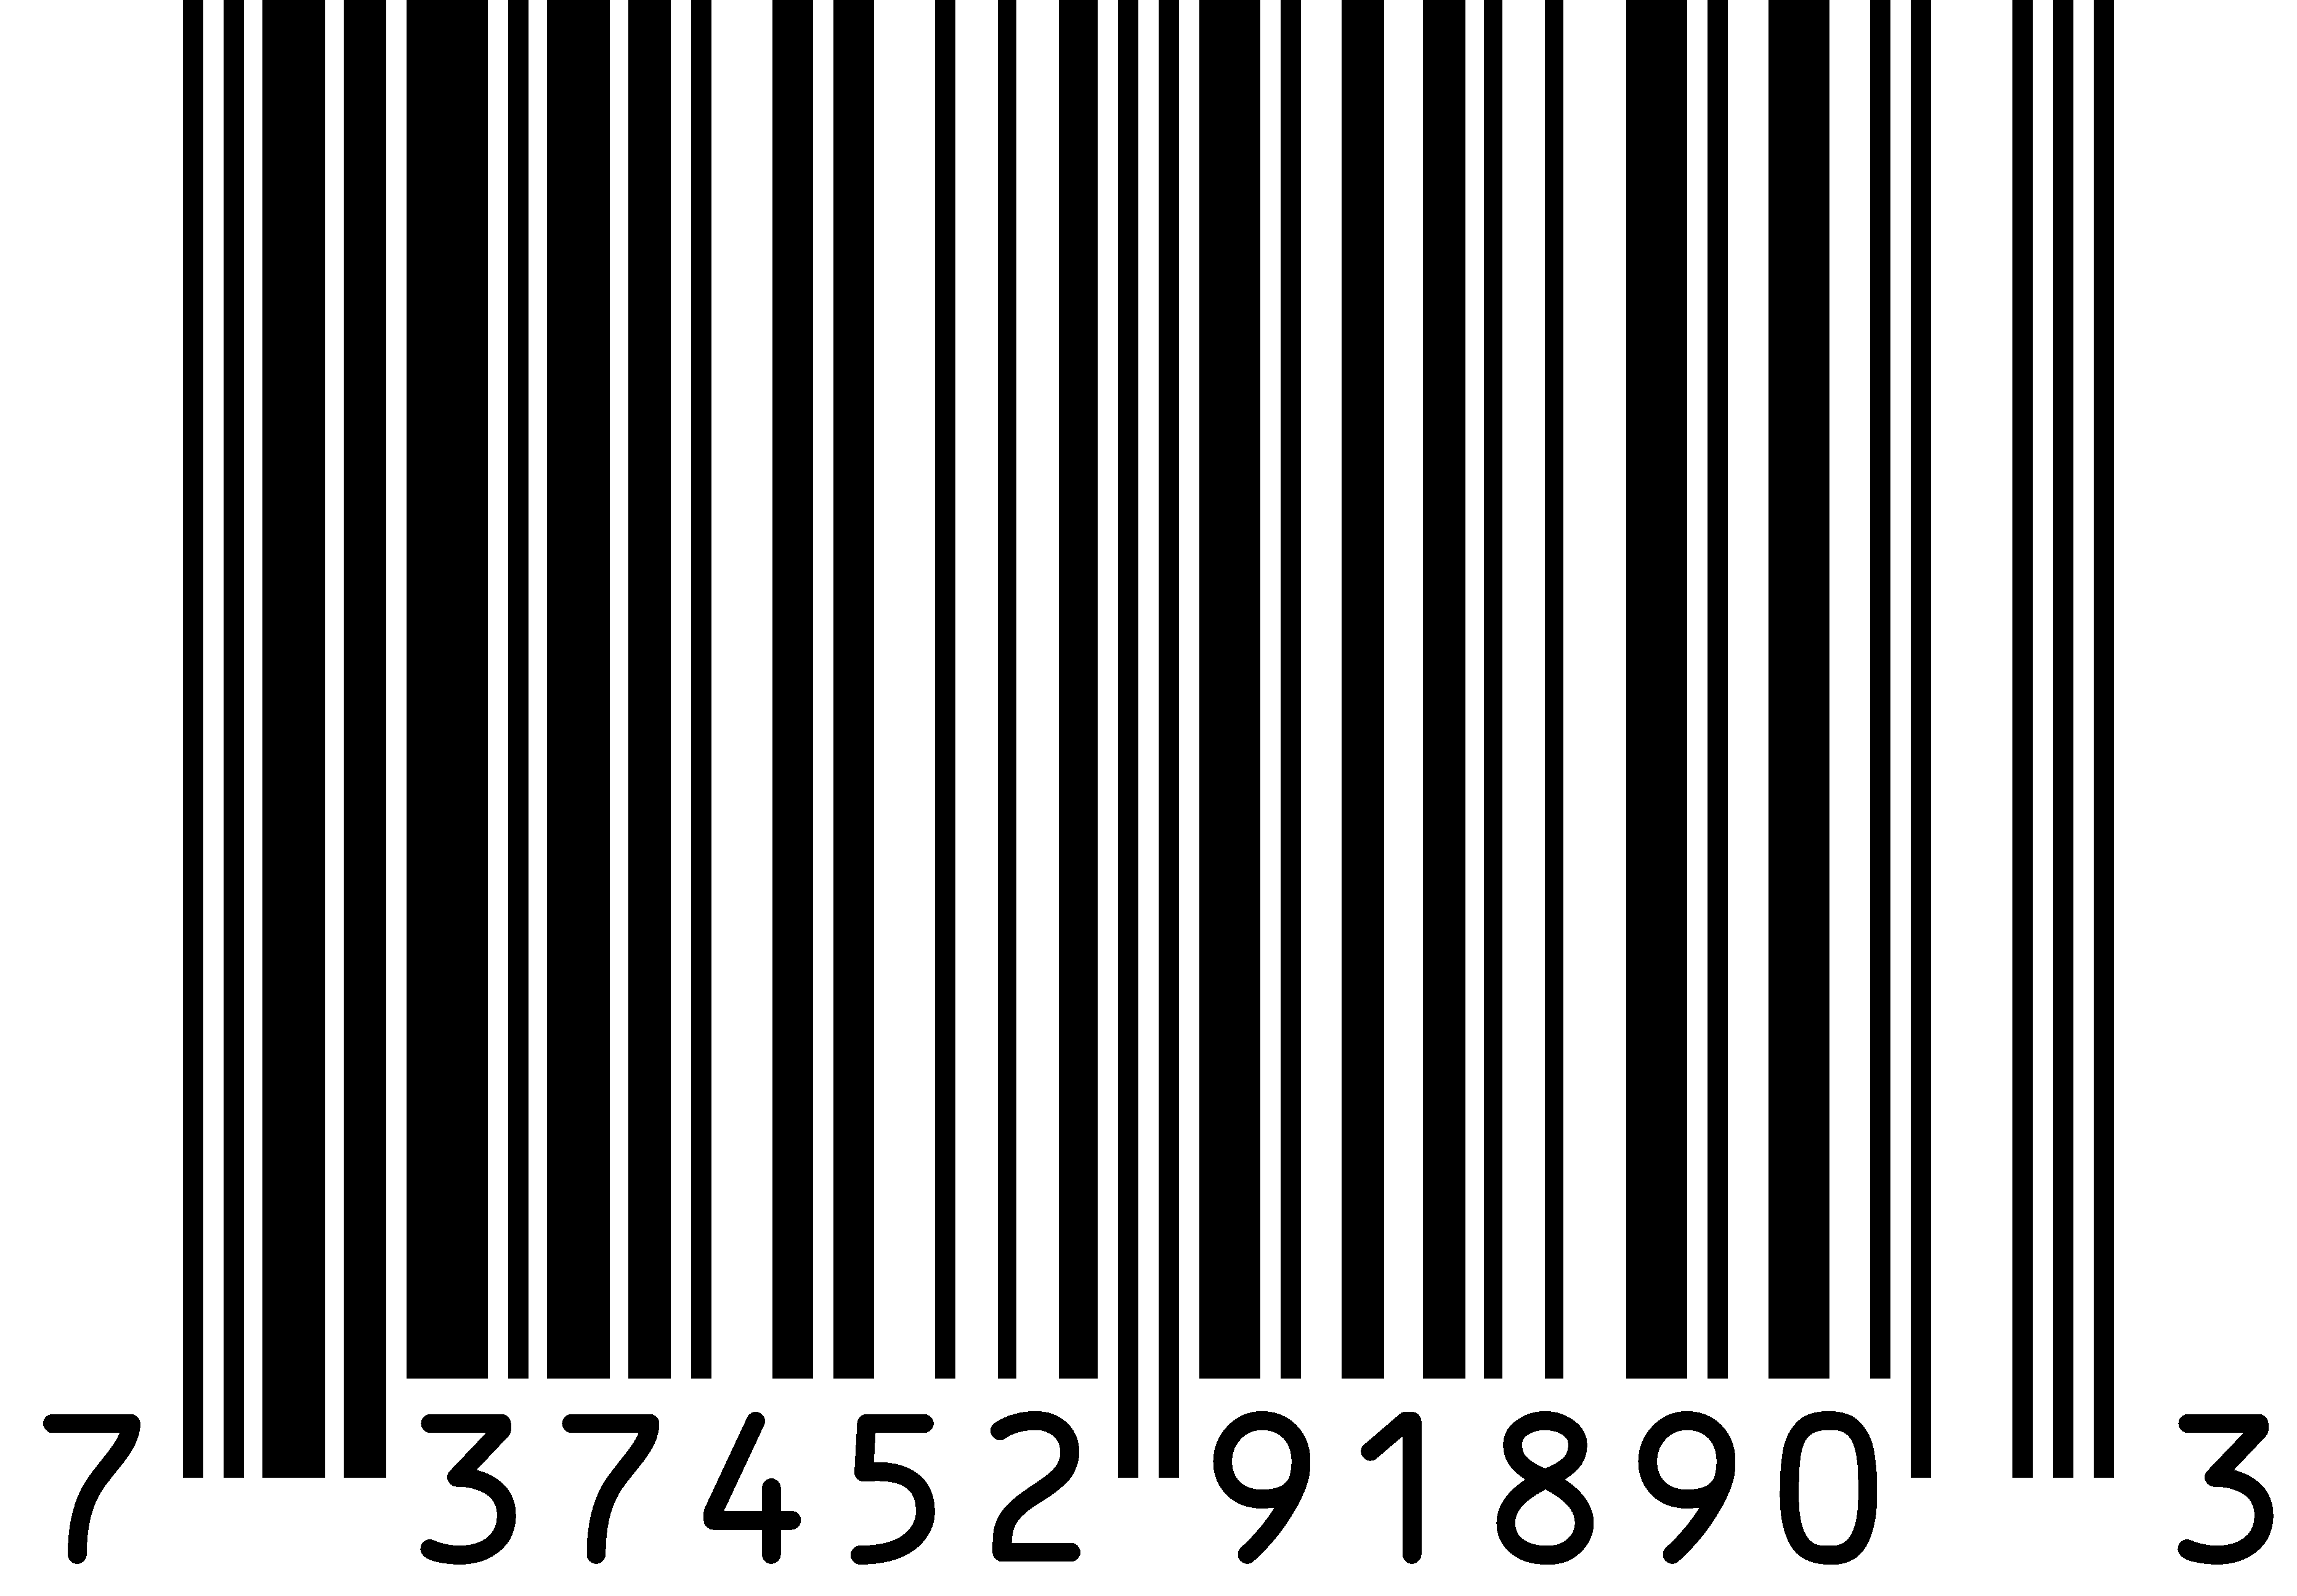 Png Images Of Barcode upc